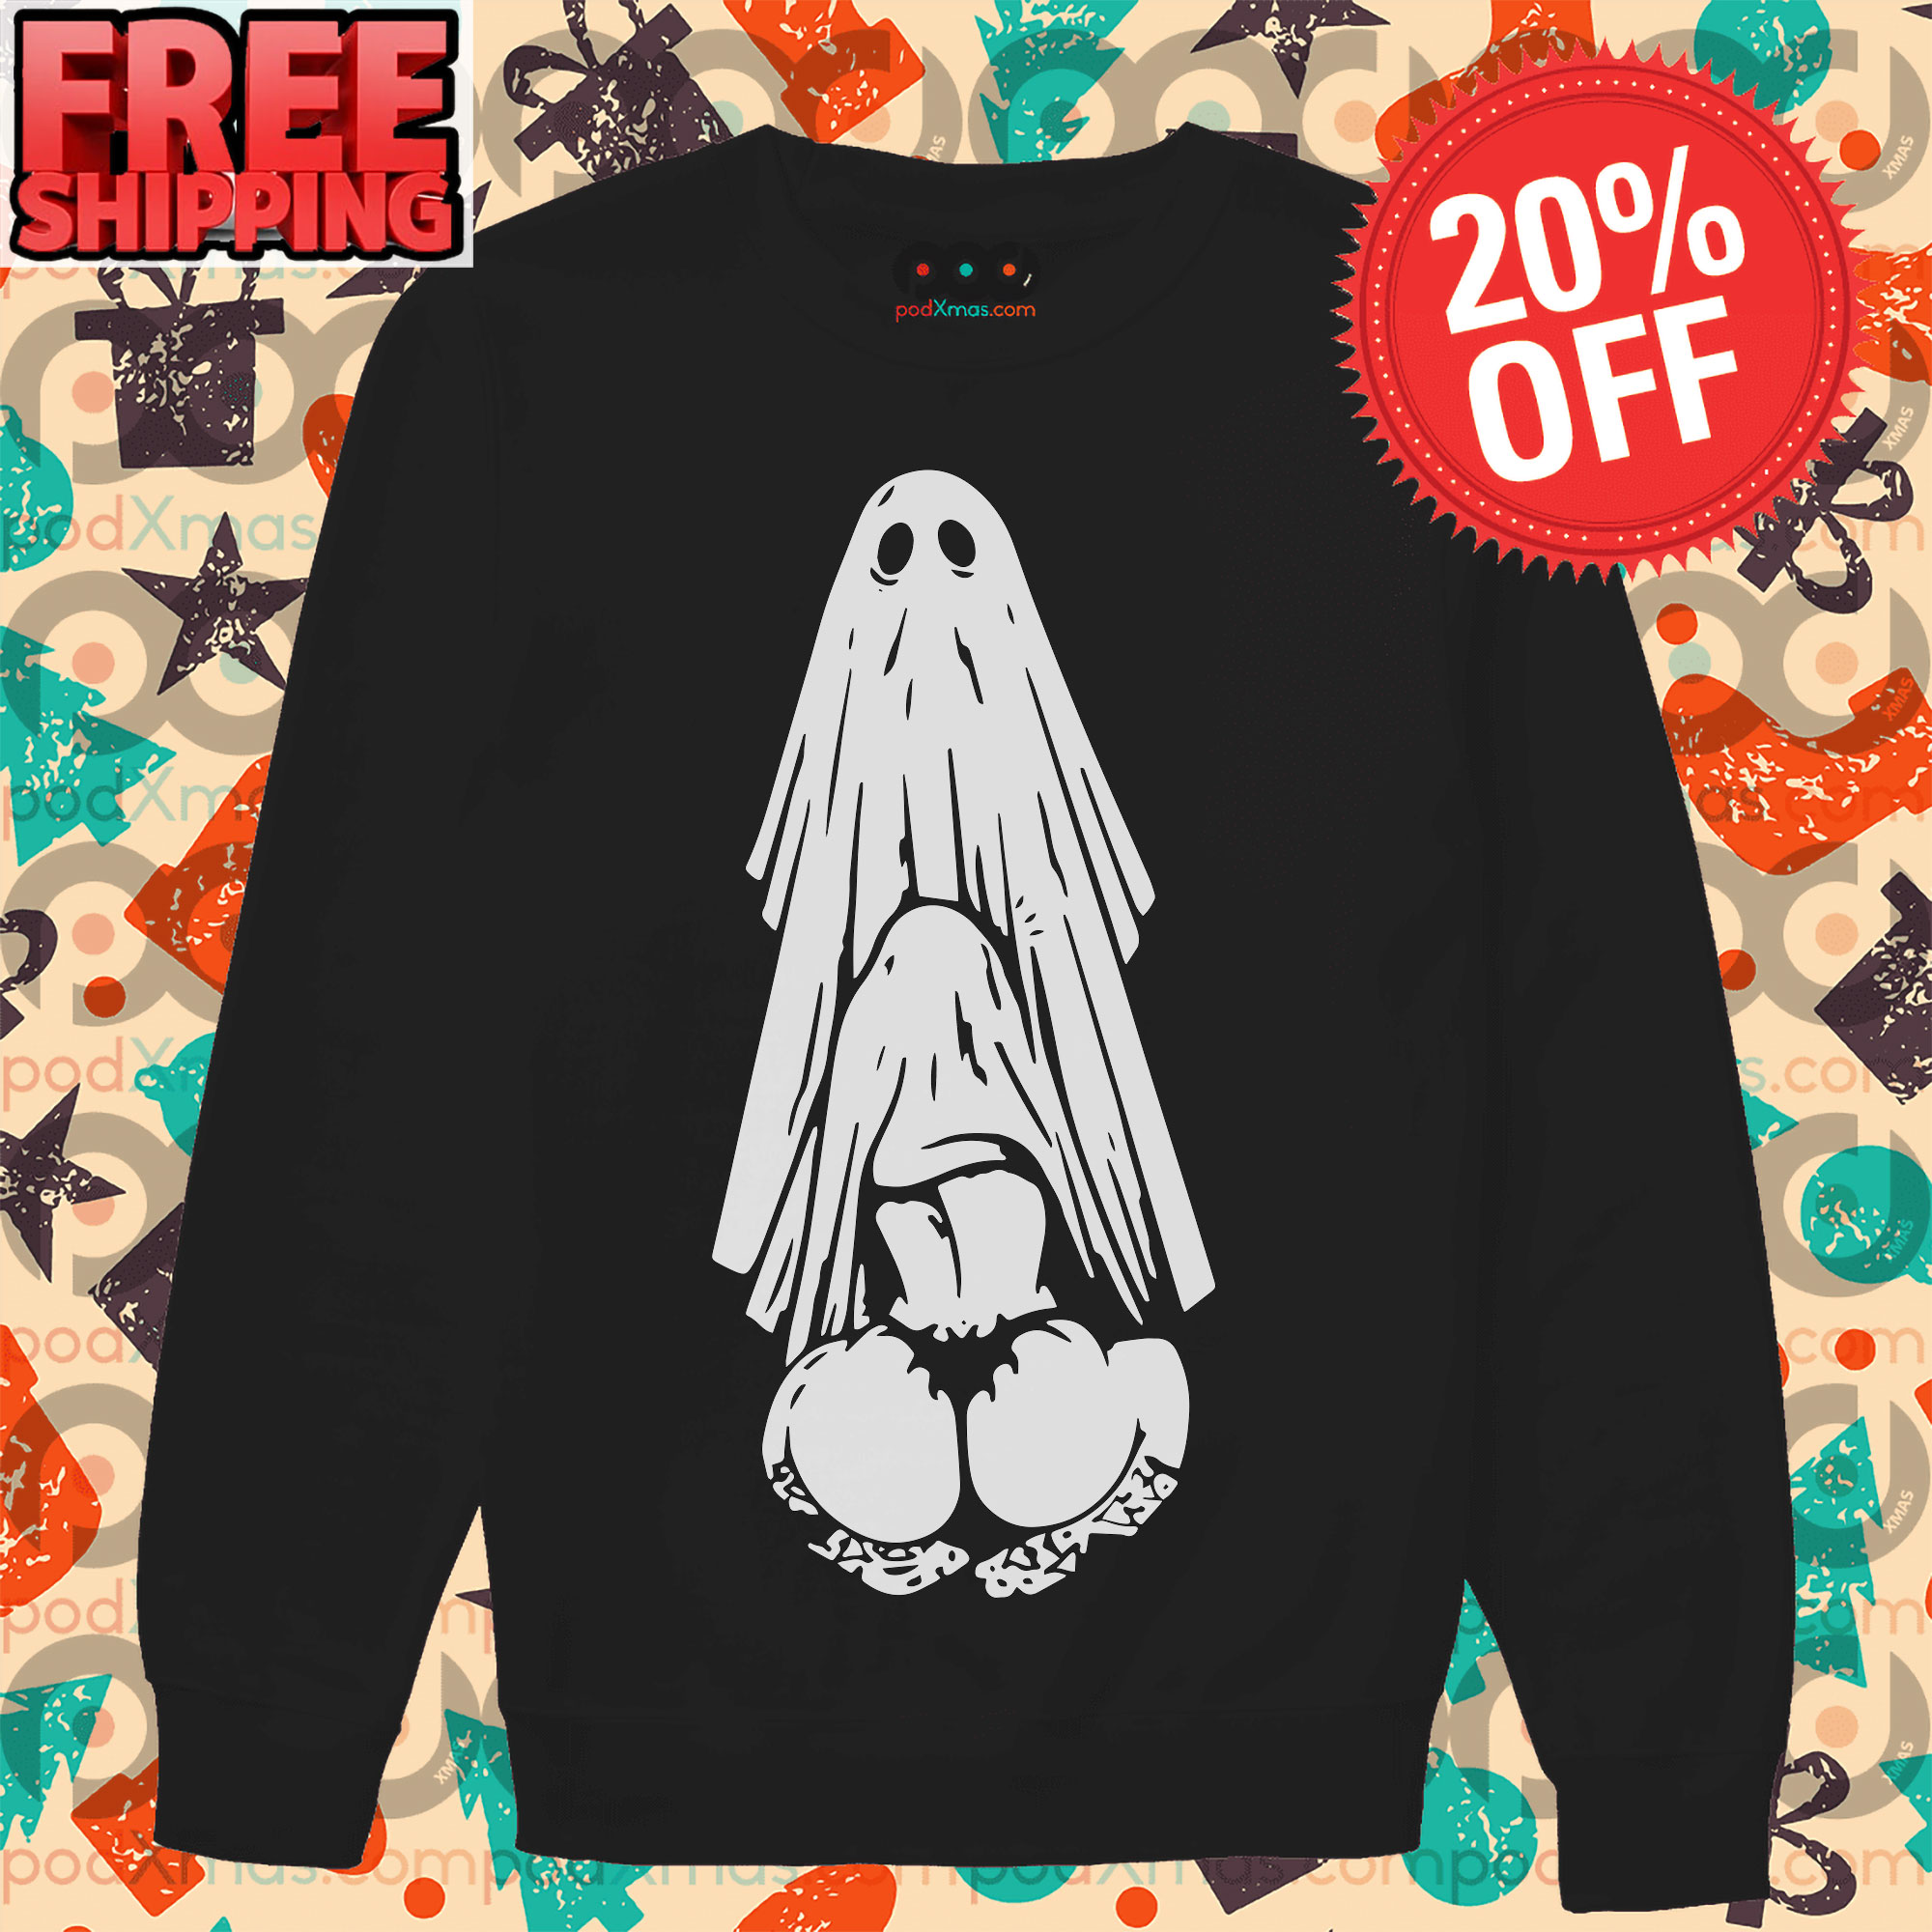 Get Ghost Blowjob Halloween Funny Shirt For Free Shipping • Custom Xmas Gift picture